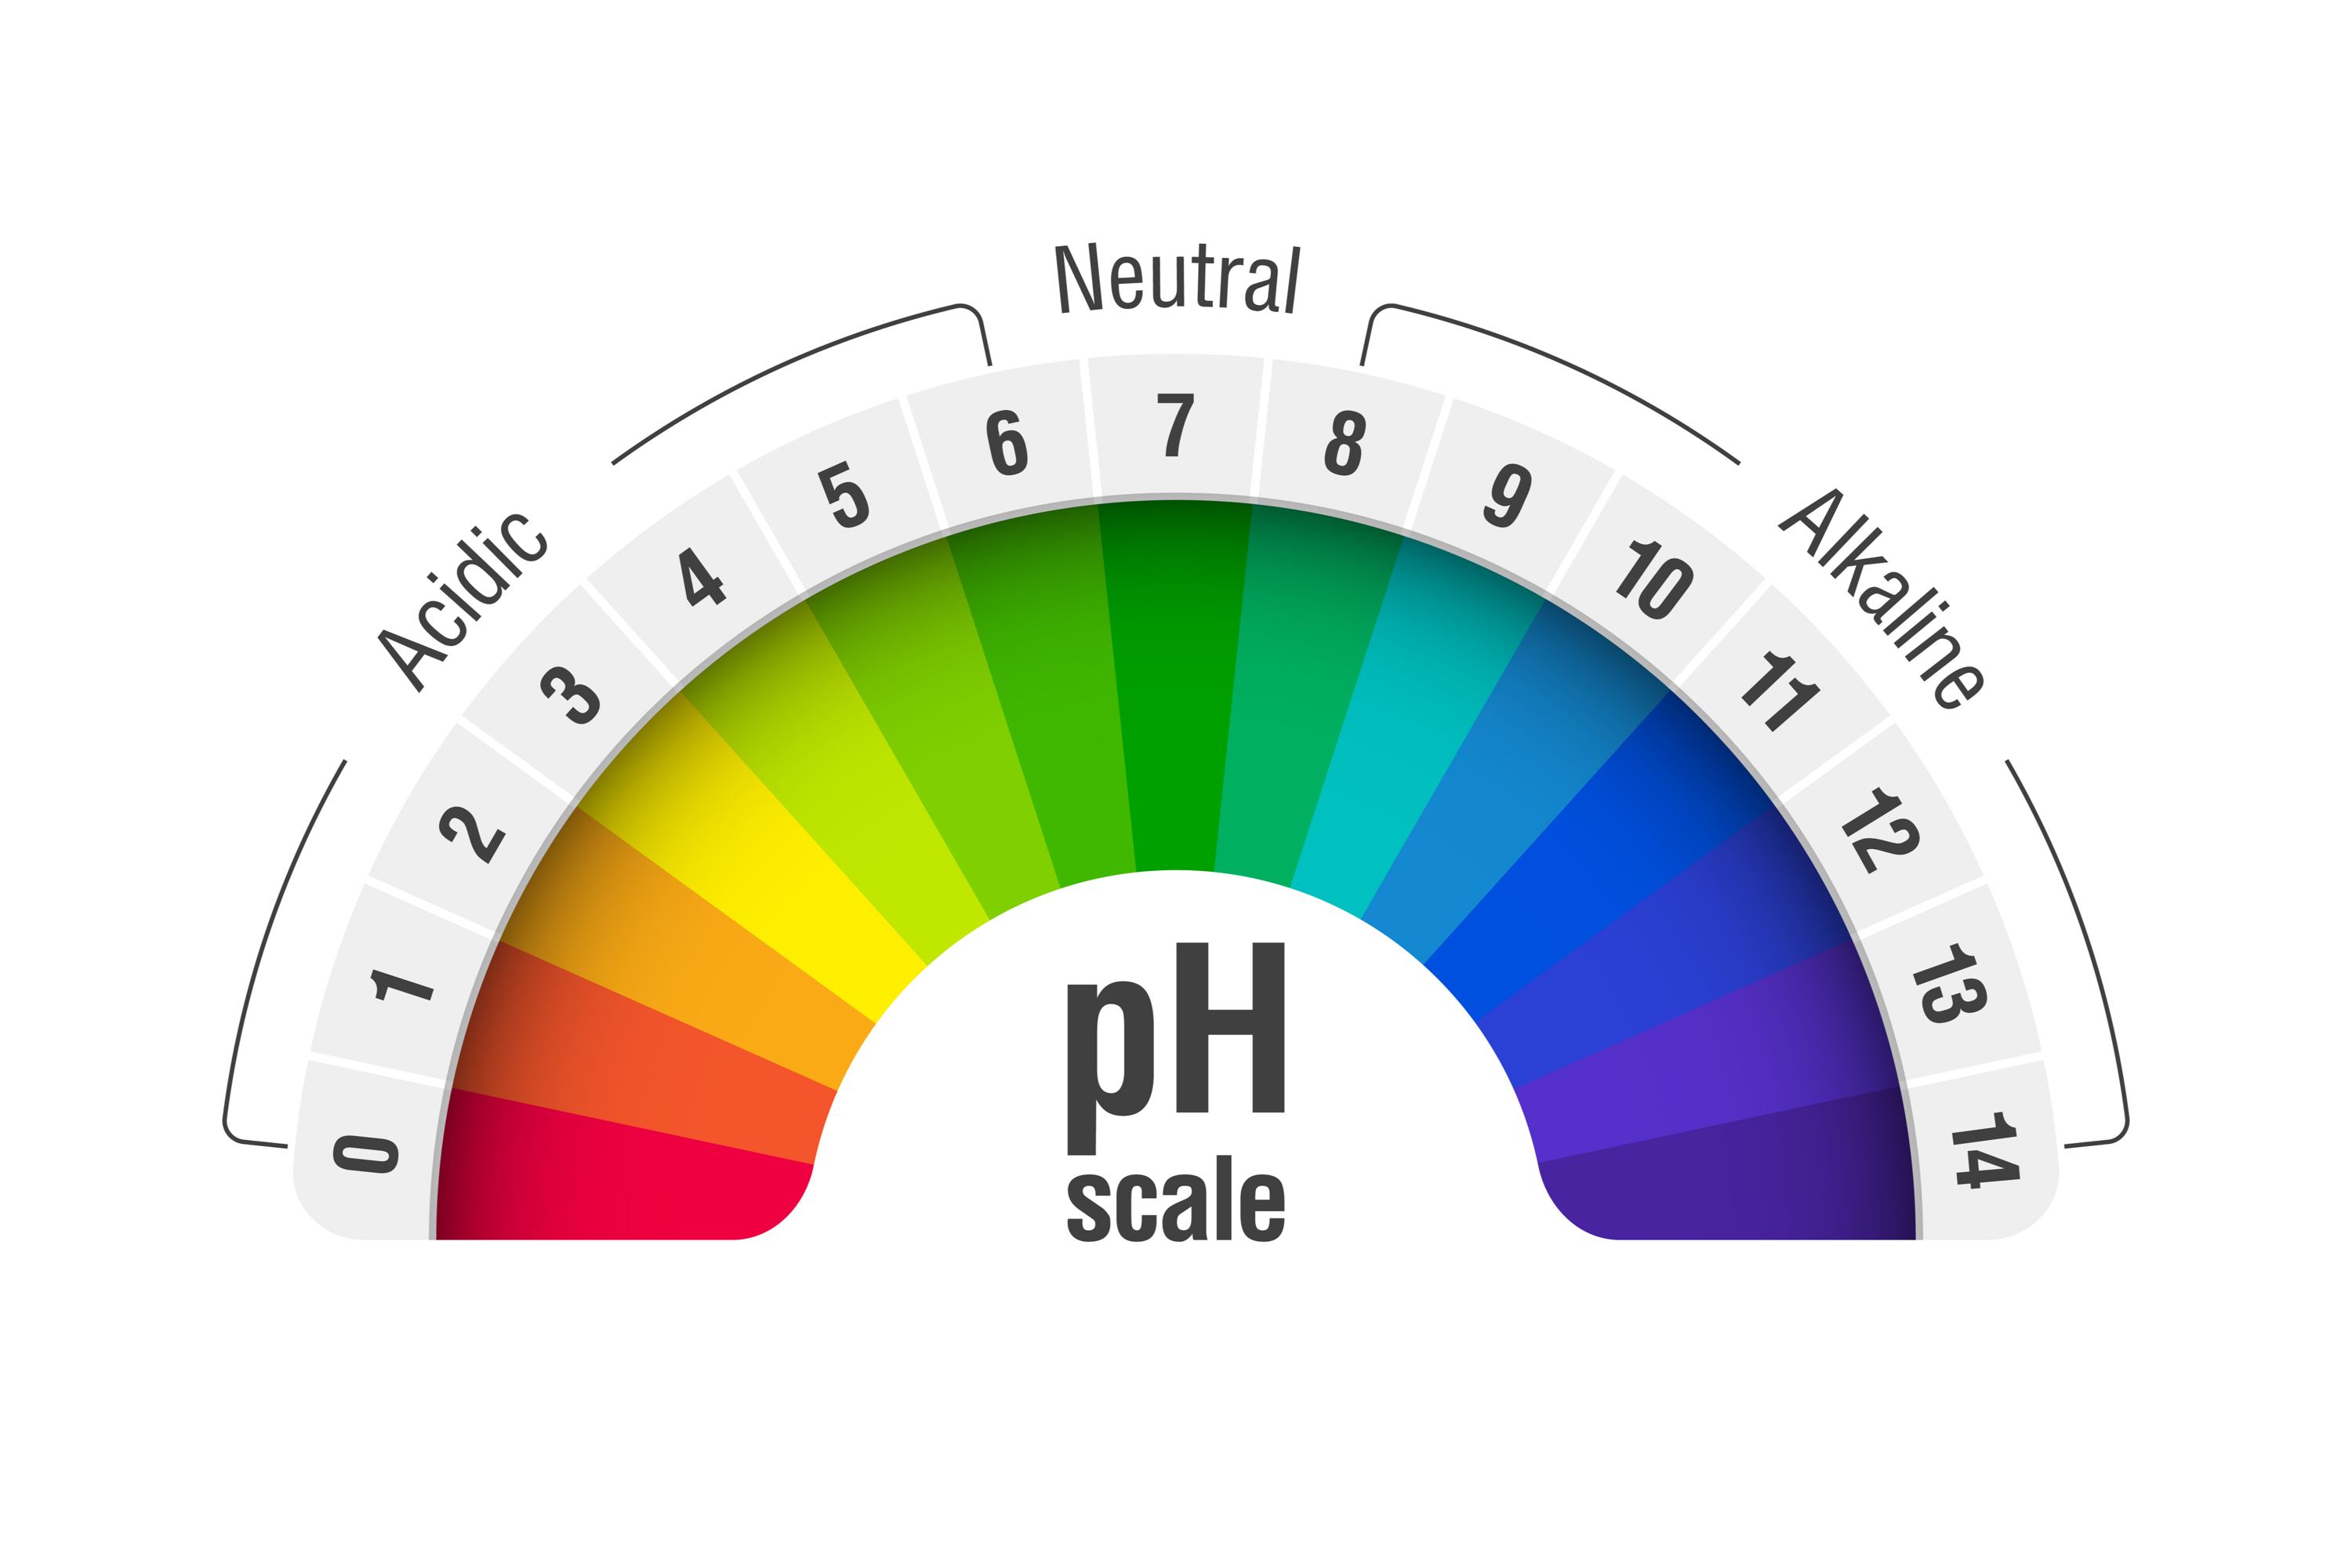 Proper pH Balance: What It Is + 4 Steps to Achieve It - Dr. Axe